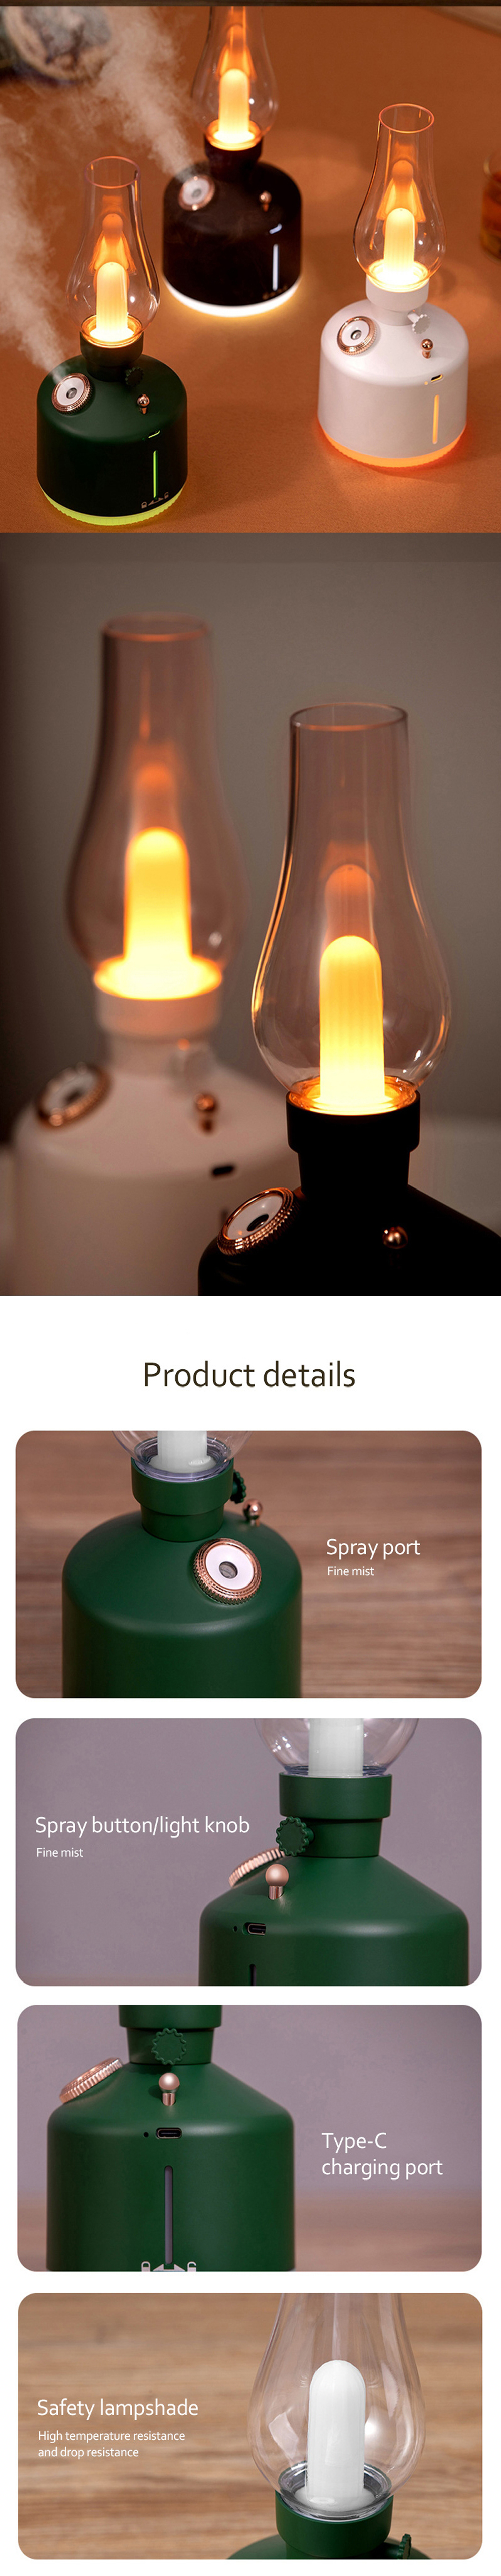 IPReereg-Colorful-Camping-Lights-2-Mode-Wireless-Humidifier-Portable-Retro-LED-Lights-Outdoor-Tent-L-1917723-4